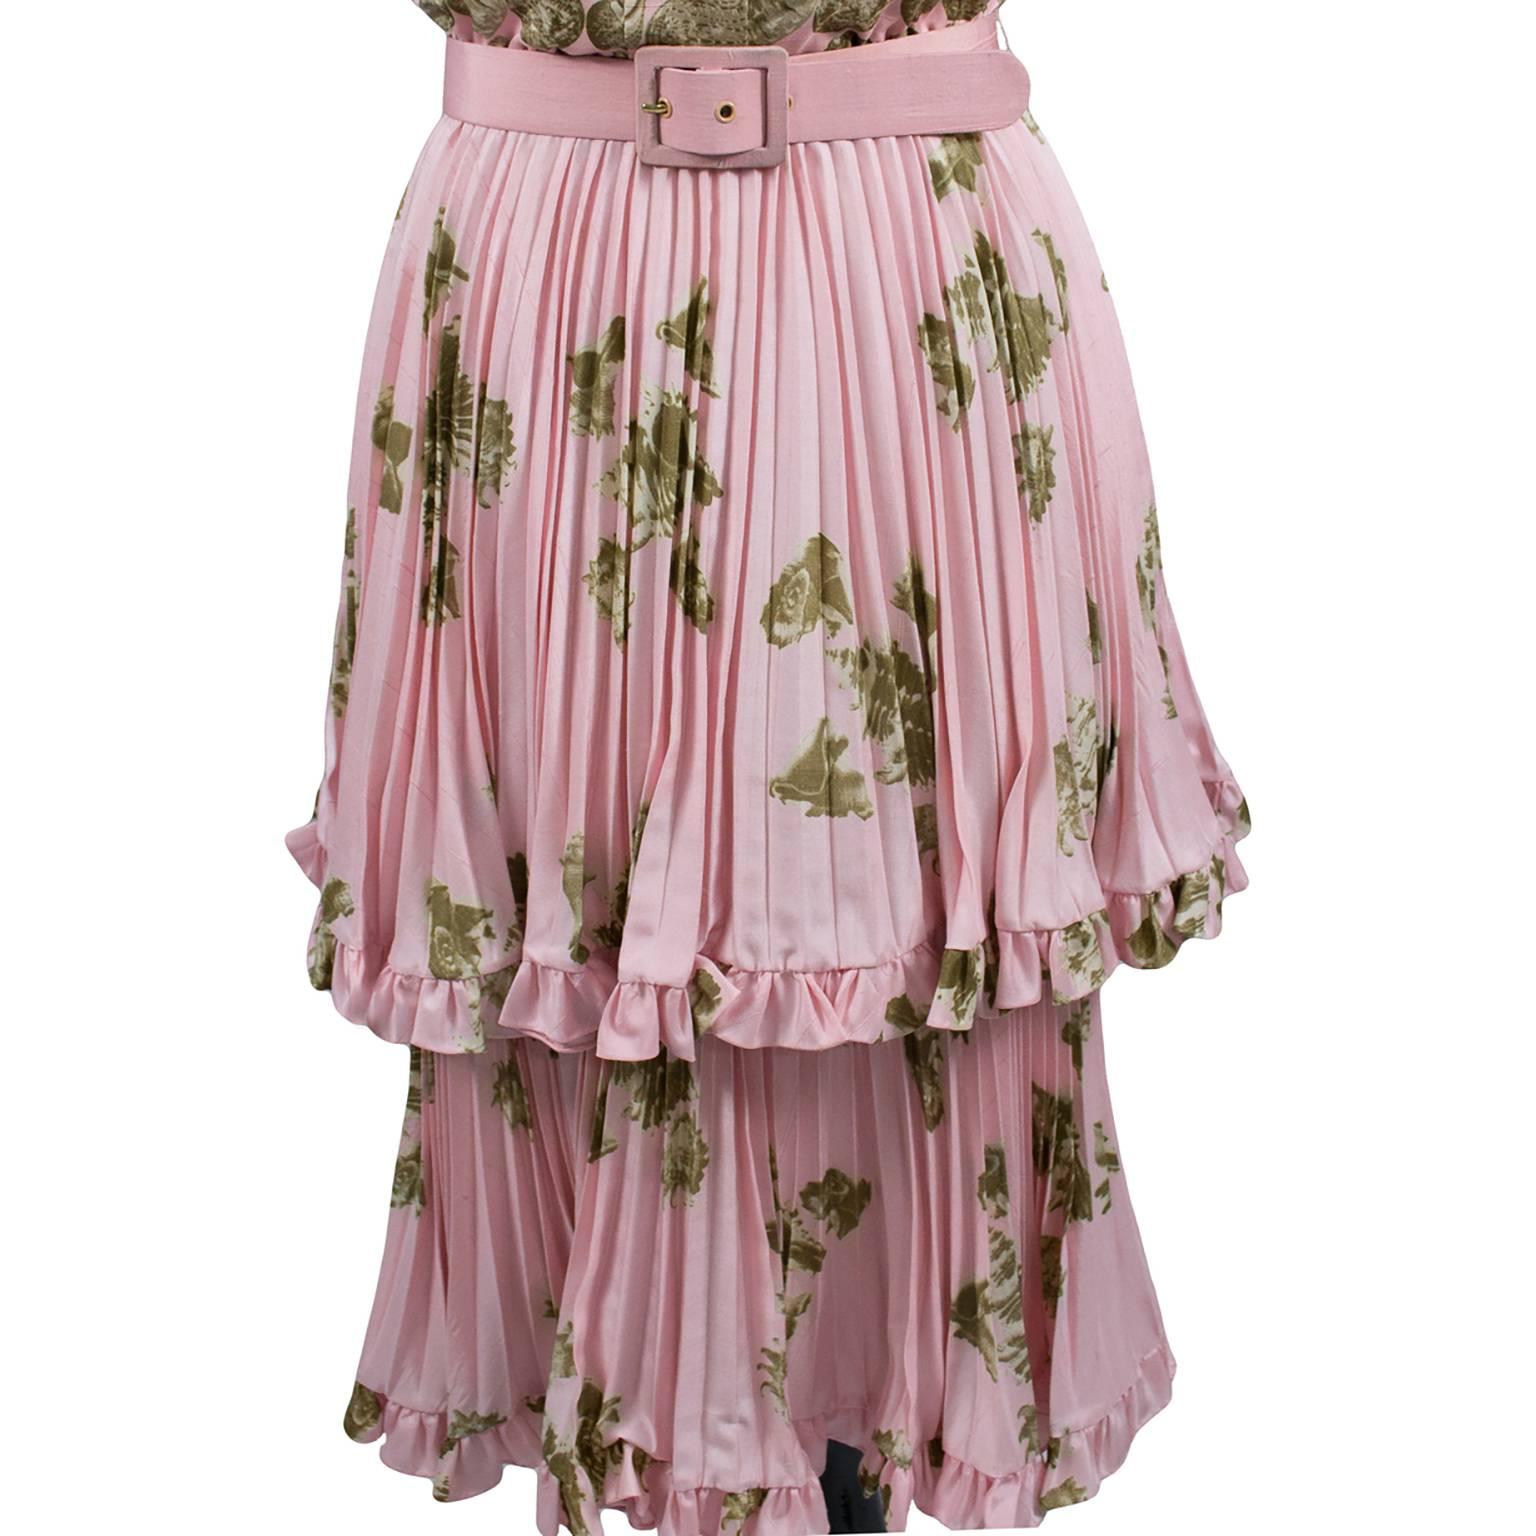 This is one of my favorite Valentino vintage dresses and it came from one of my all time favorite estates of vintage clothing and accessories.  This pink silk dress was made in Italy in the 1970's and has beautiful light brown seashells and a